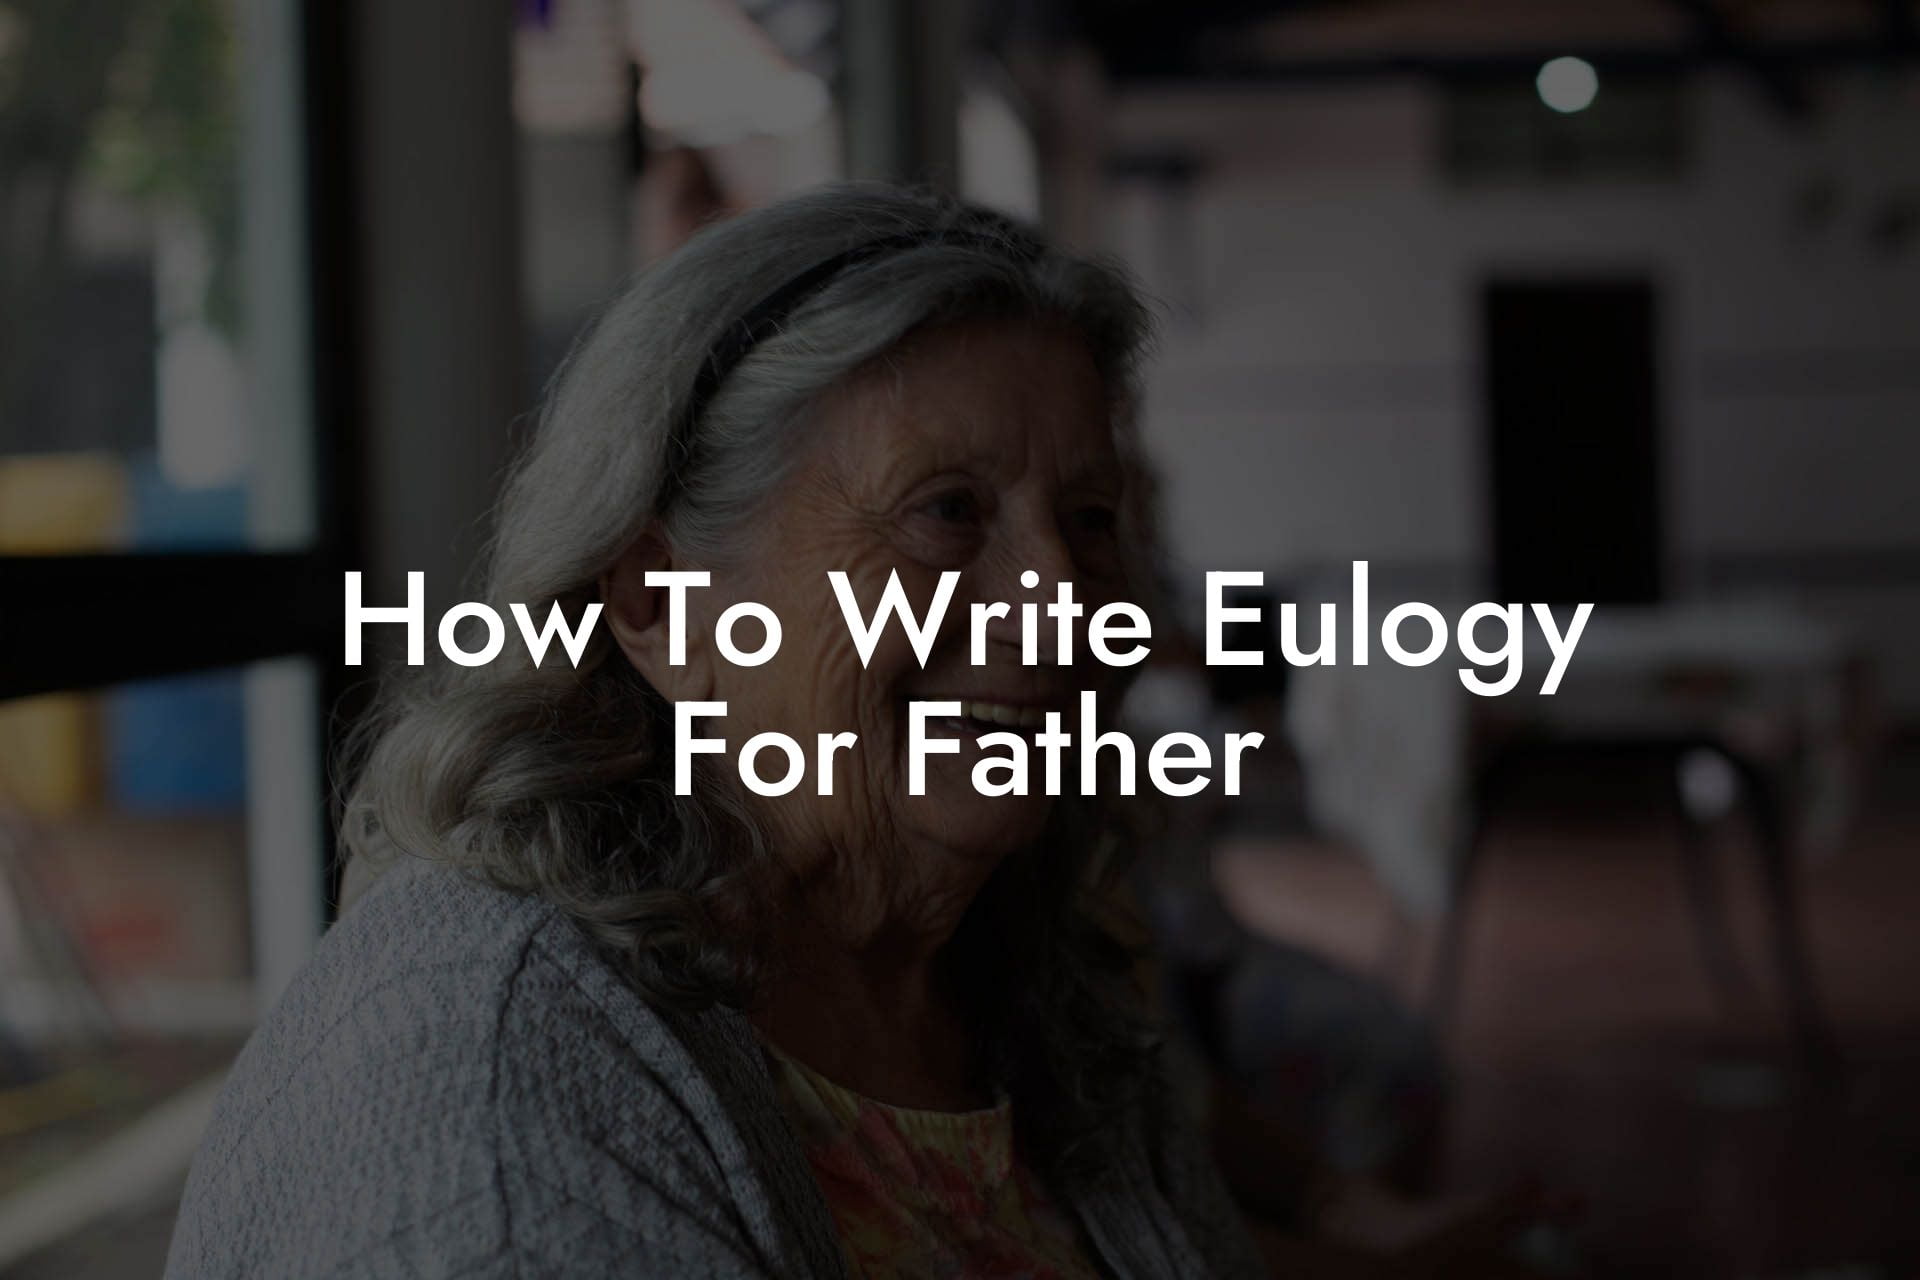 How To Write Eulogy For Father